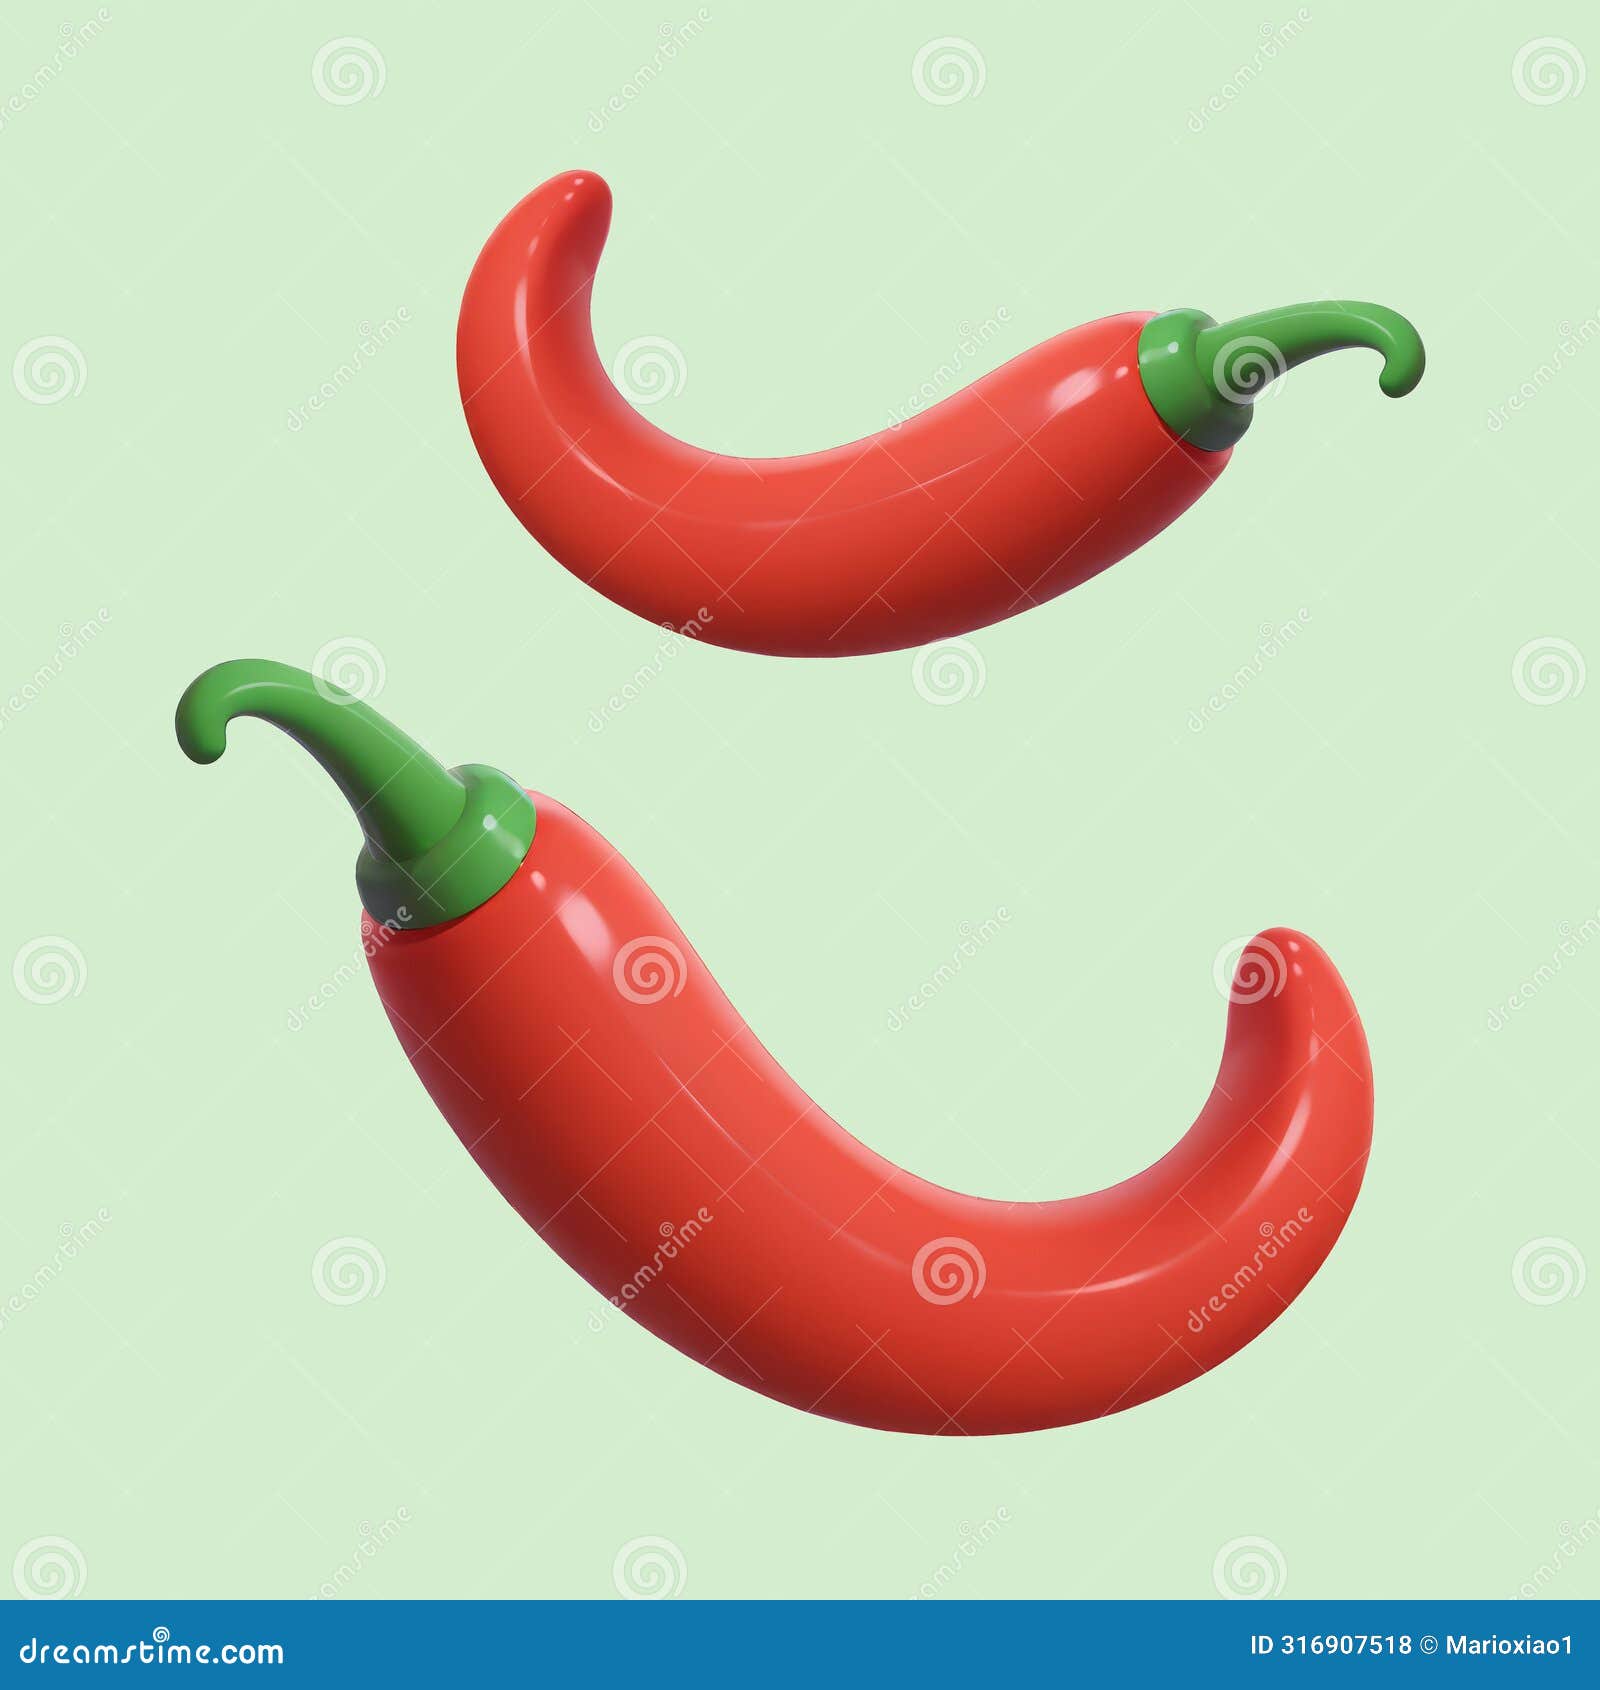 peppy pepper: illustrated escapades of a red hot chili